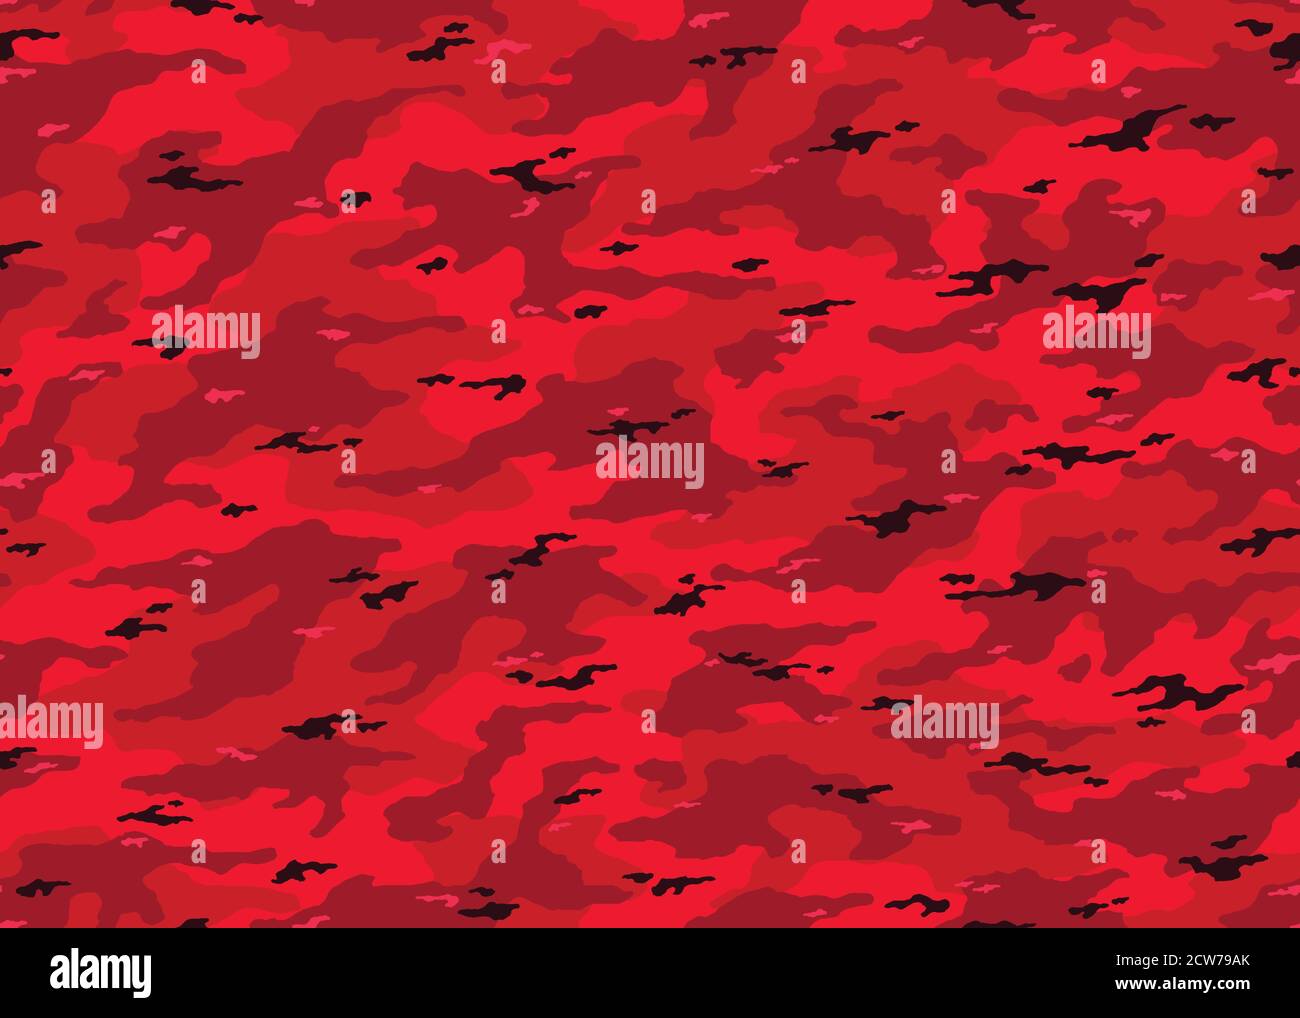 Modern Red camouflage seamless pattern. Camo vector background illustration for web, banner, backdrop or surface design use Stock Vector